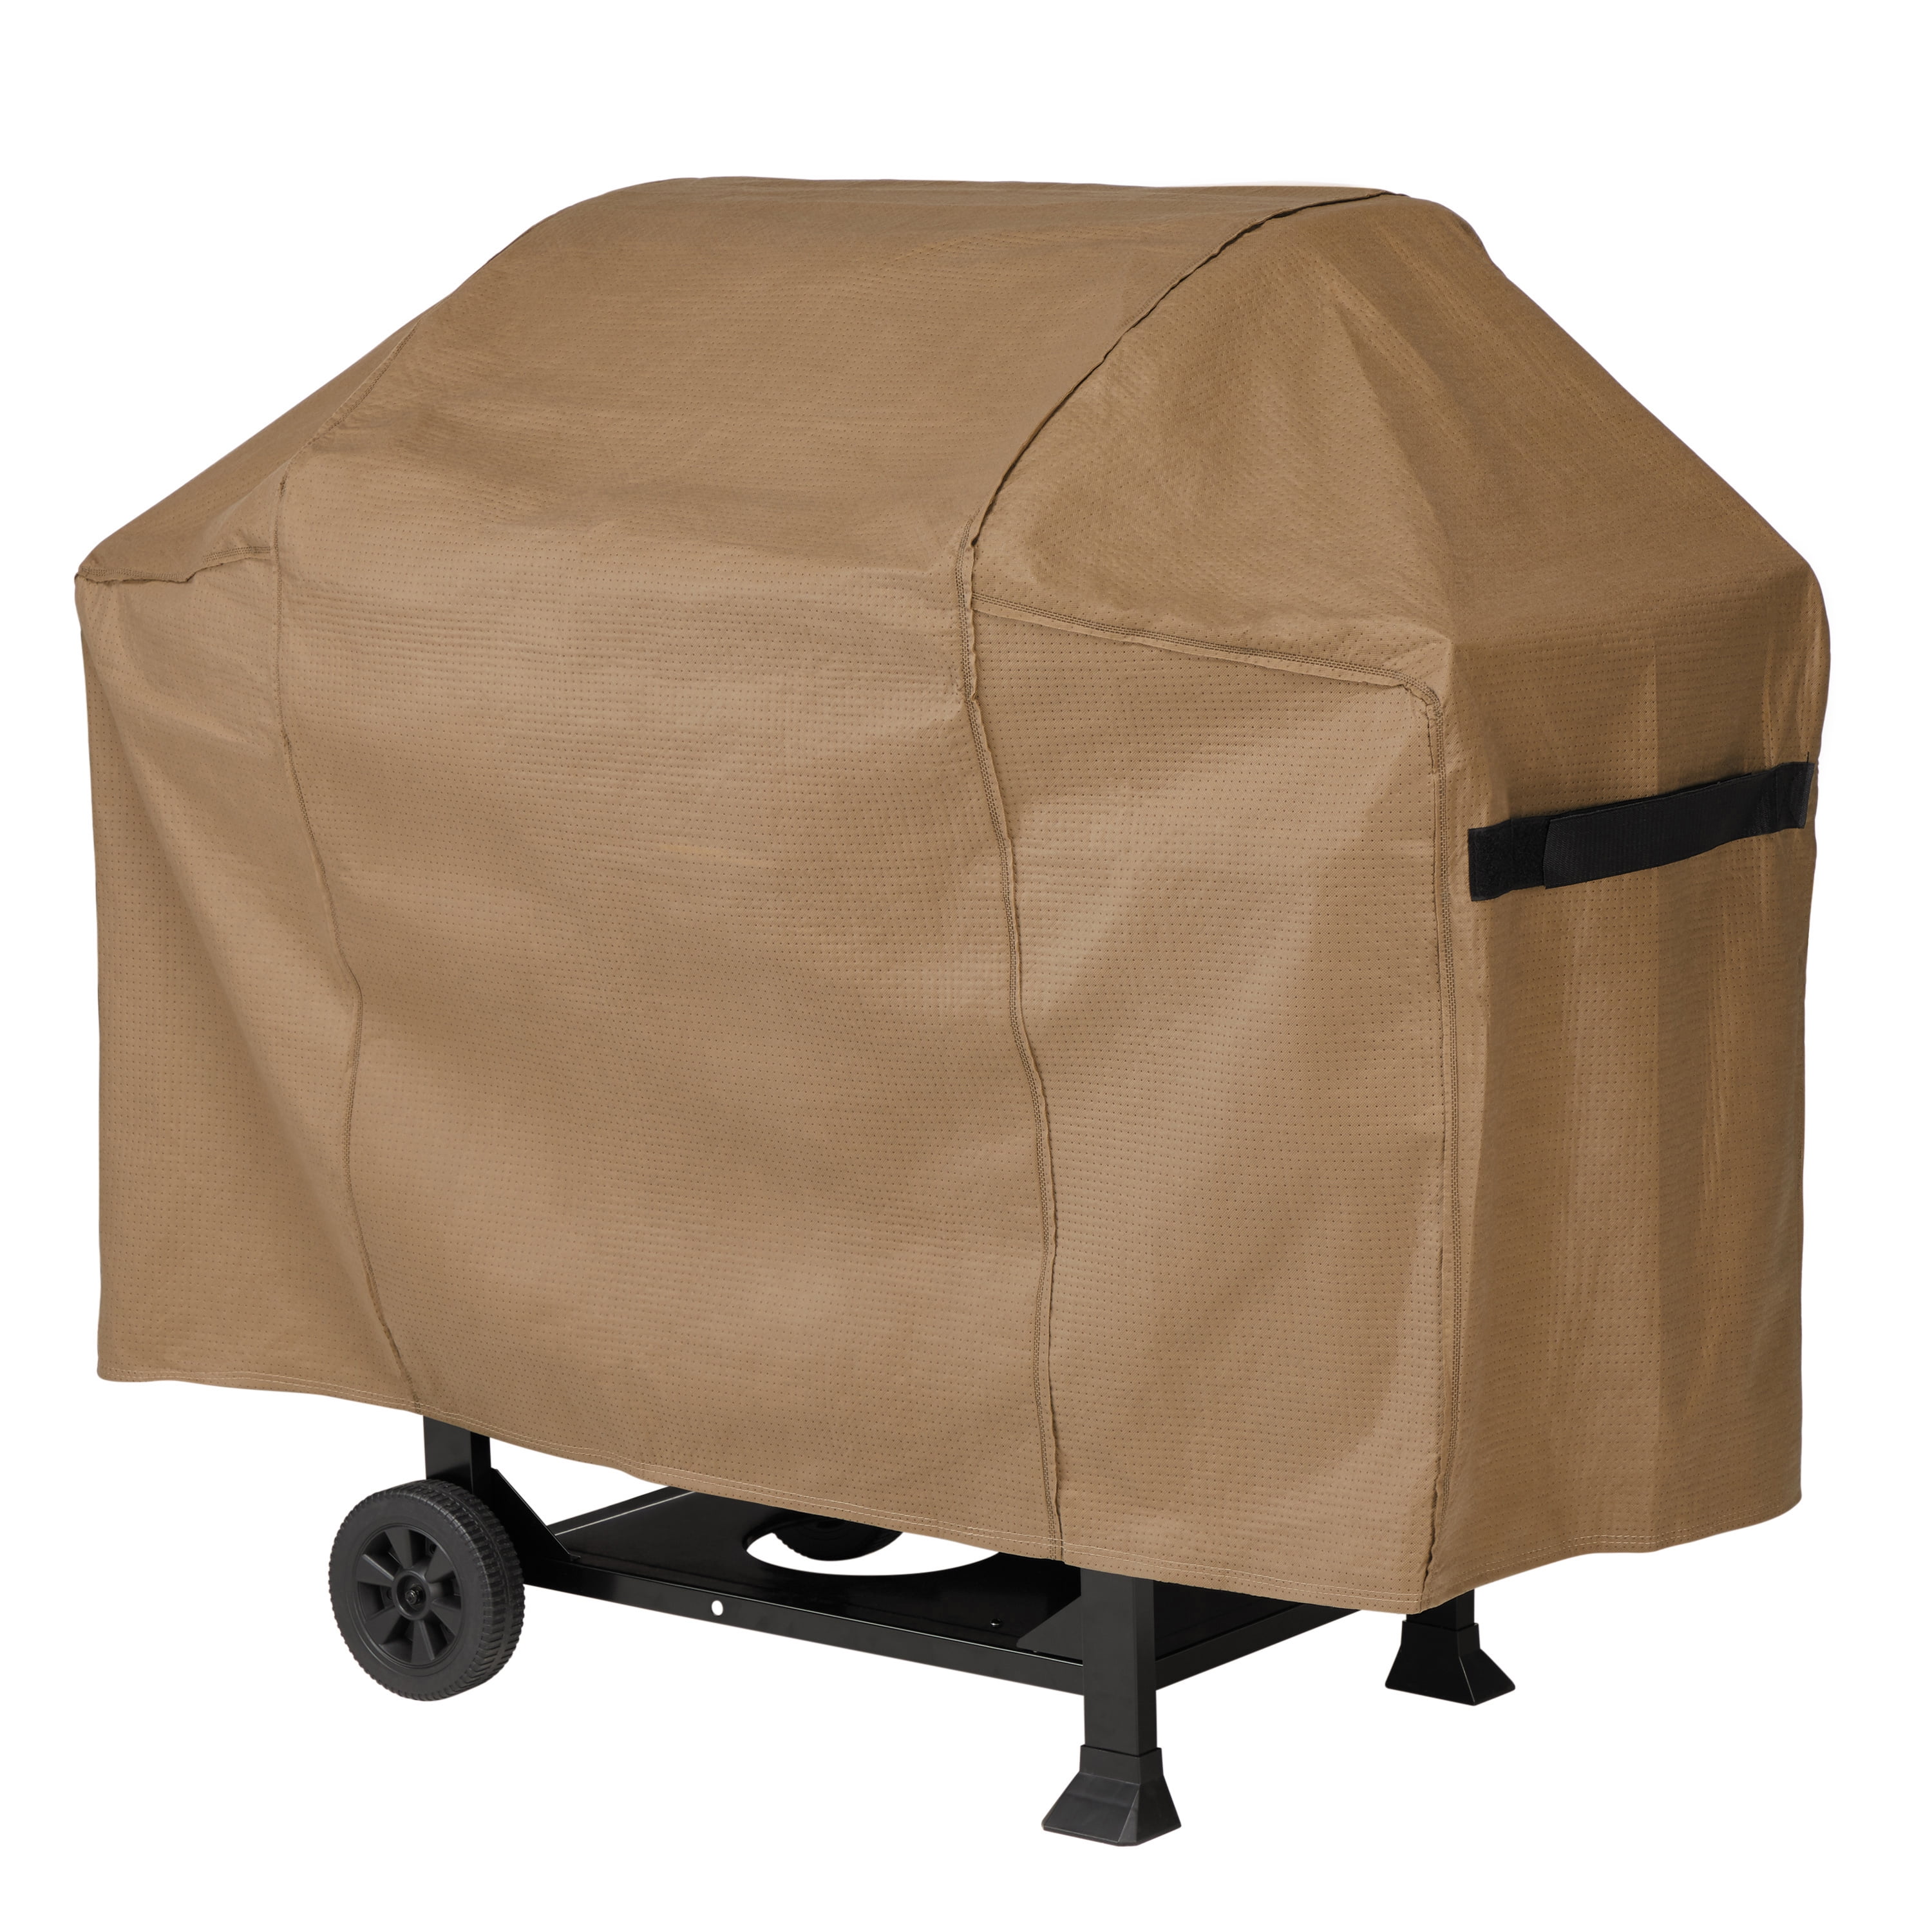 Gas Barbecue Grill Cover Heavy-Duty Waterproof Patio Outdoor Protection XL 70" 